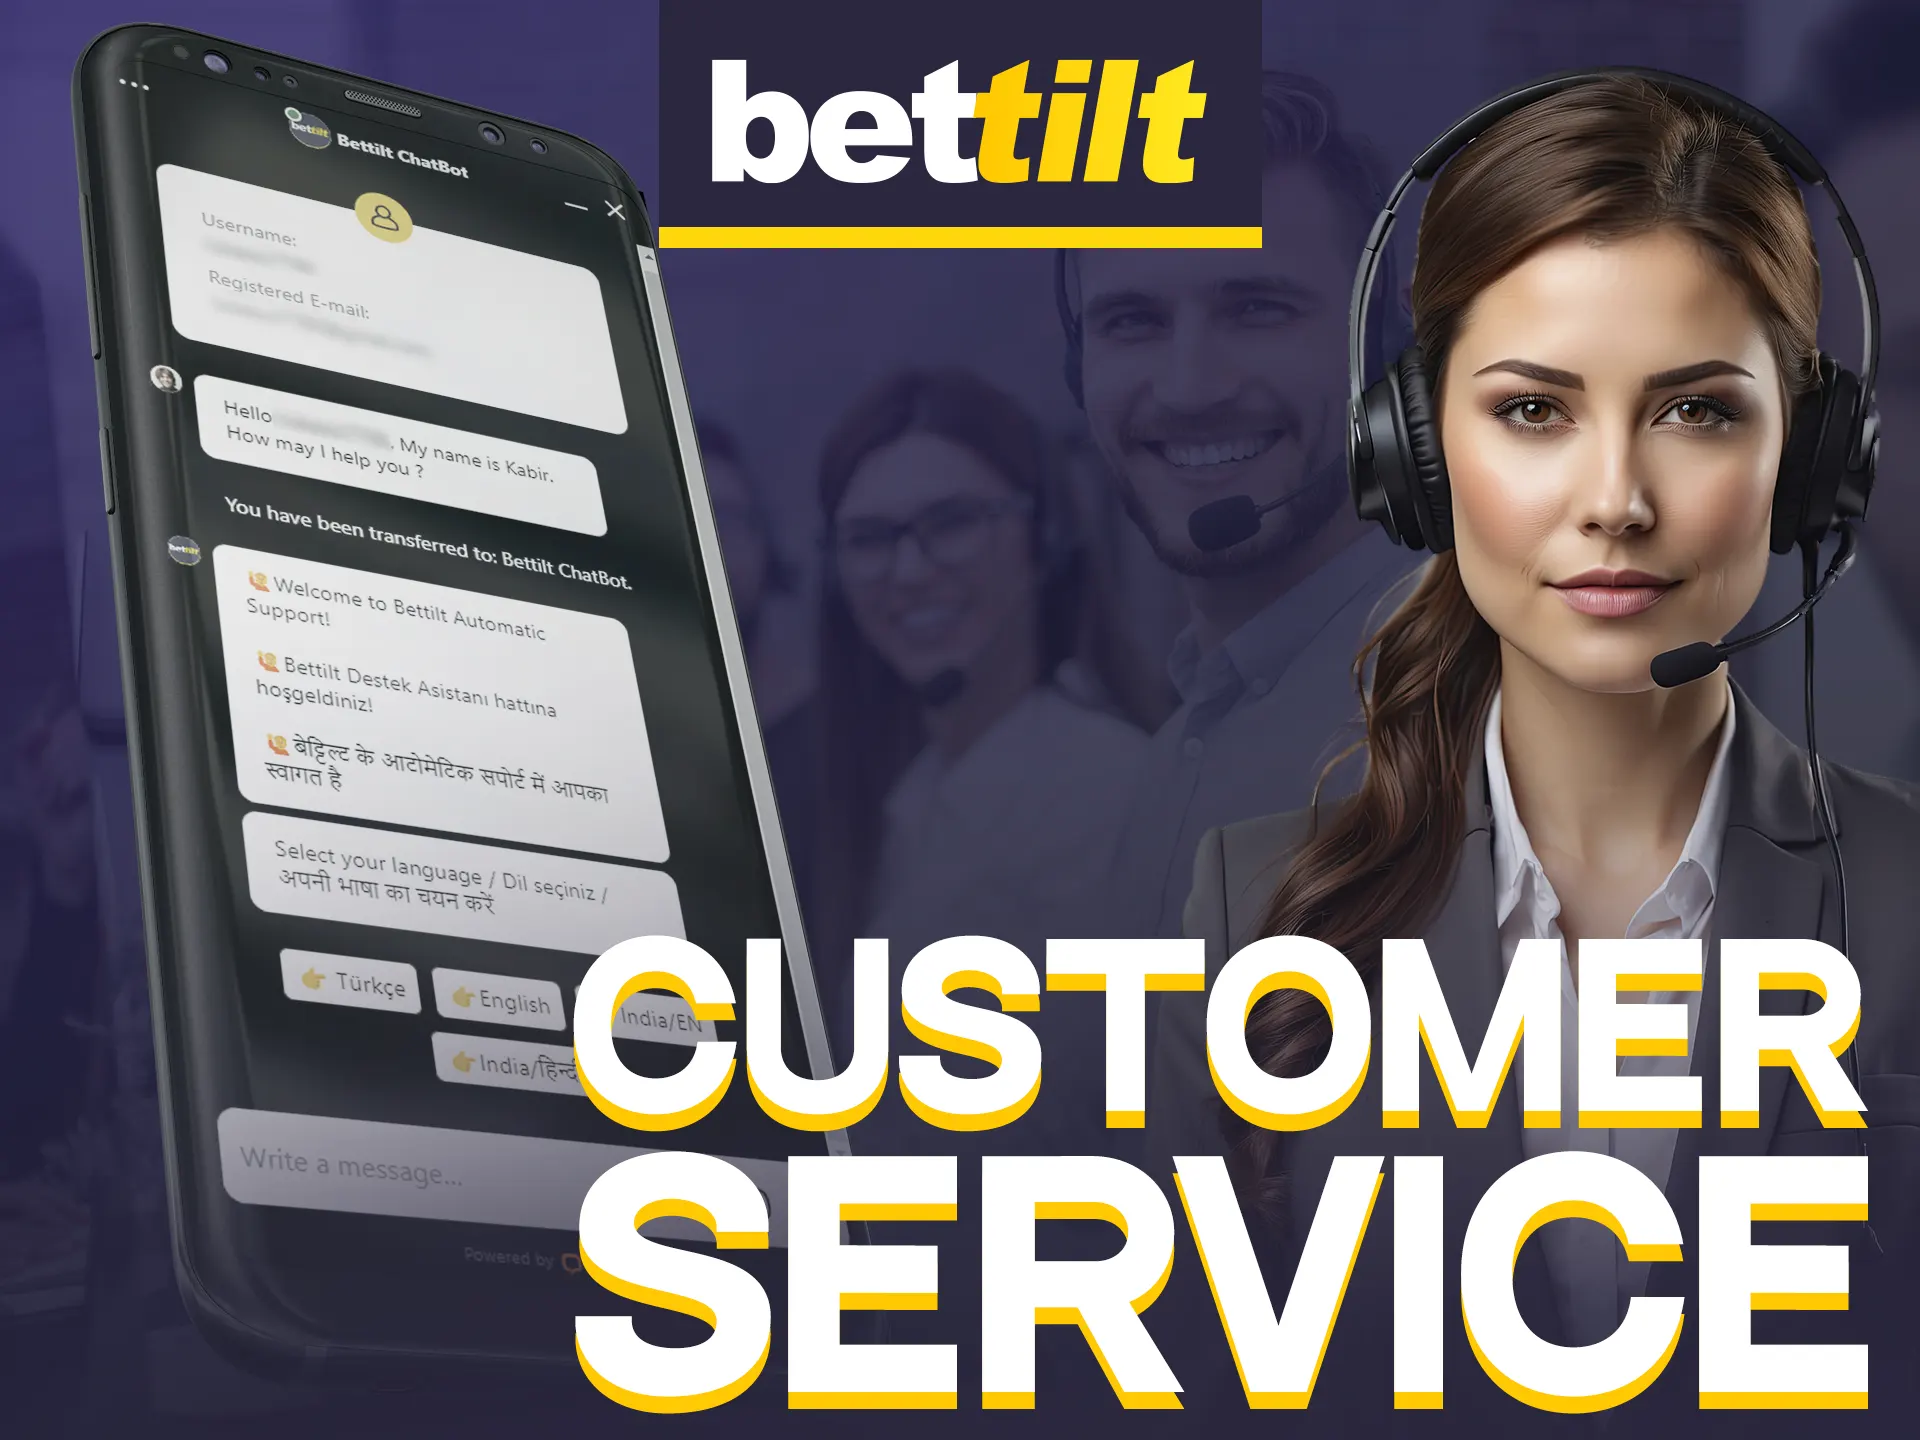 Bettilt prioritizes customer satisfaction with round-the-clock support.